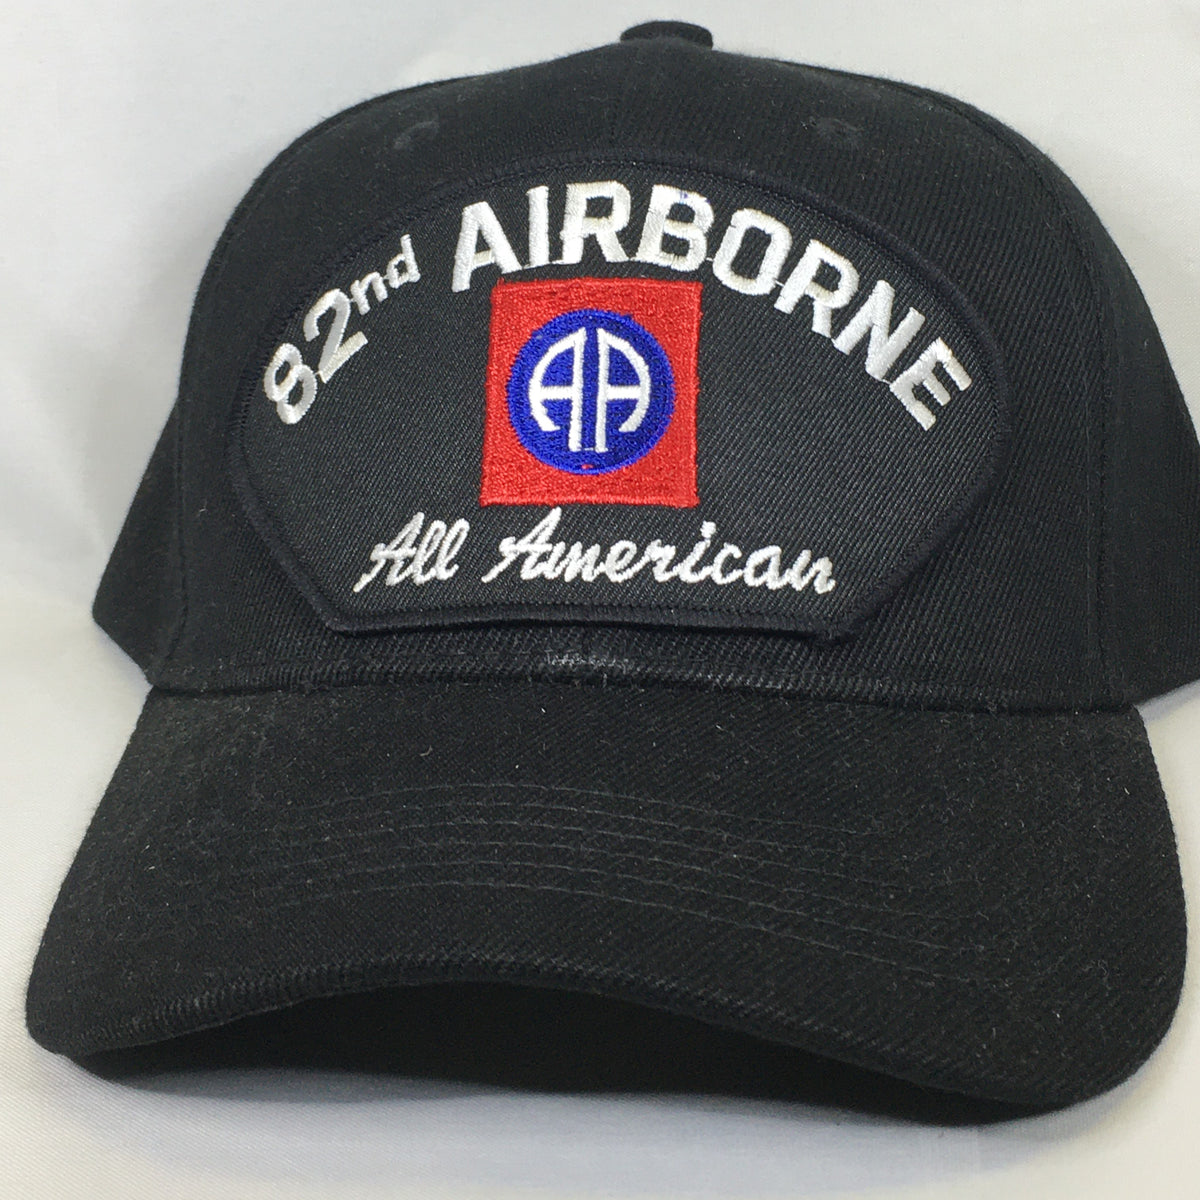 82nd Airborne All American Cap